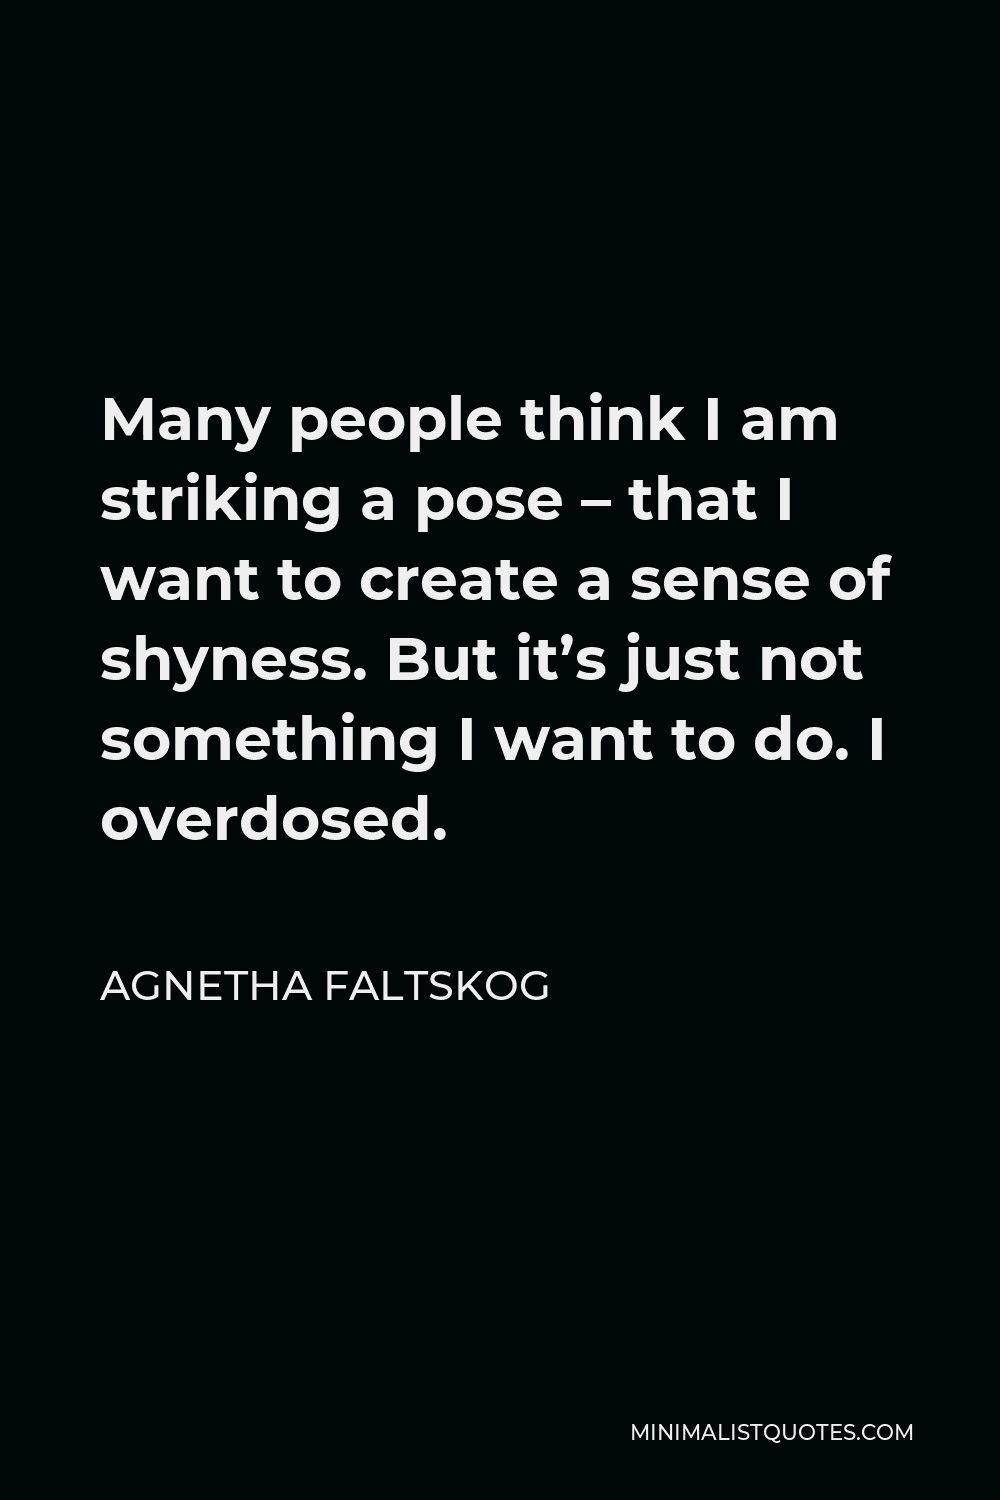 Agnetha Faltskog Quote - Many people think I am striking a pose – that I want to create a sense of shyness. But it’s just not something I want to do. I overdosed.